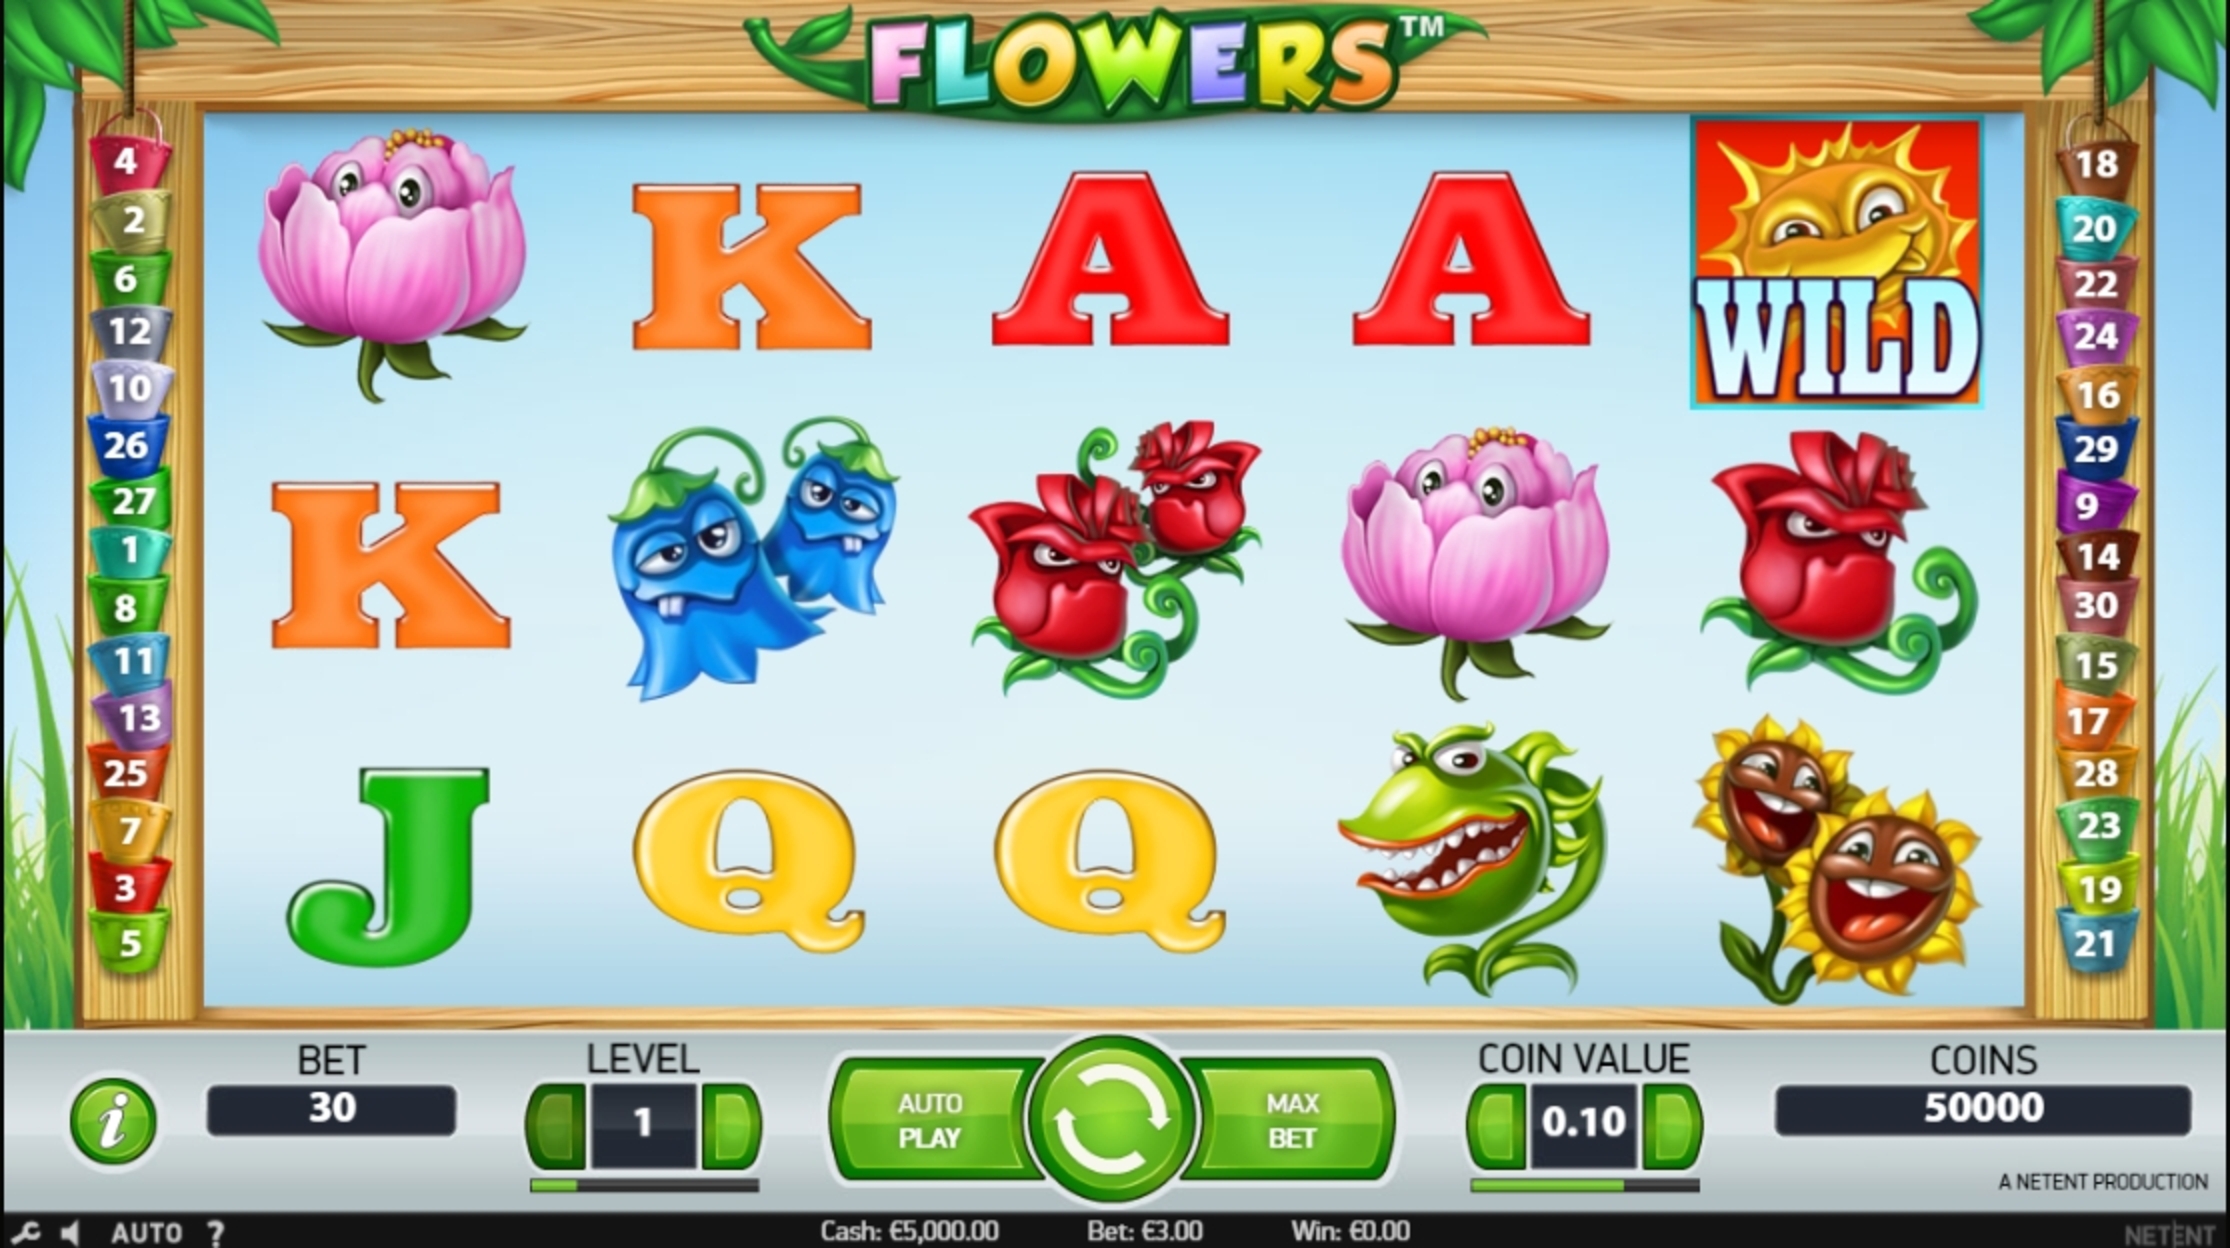 Reels in Flowers Slot Game by NetEnt